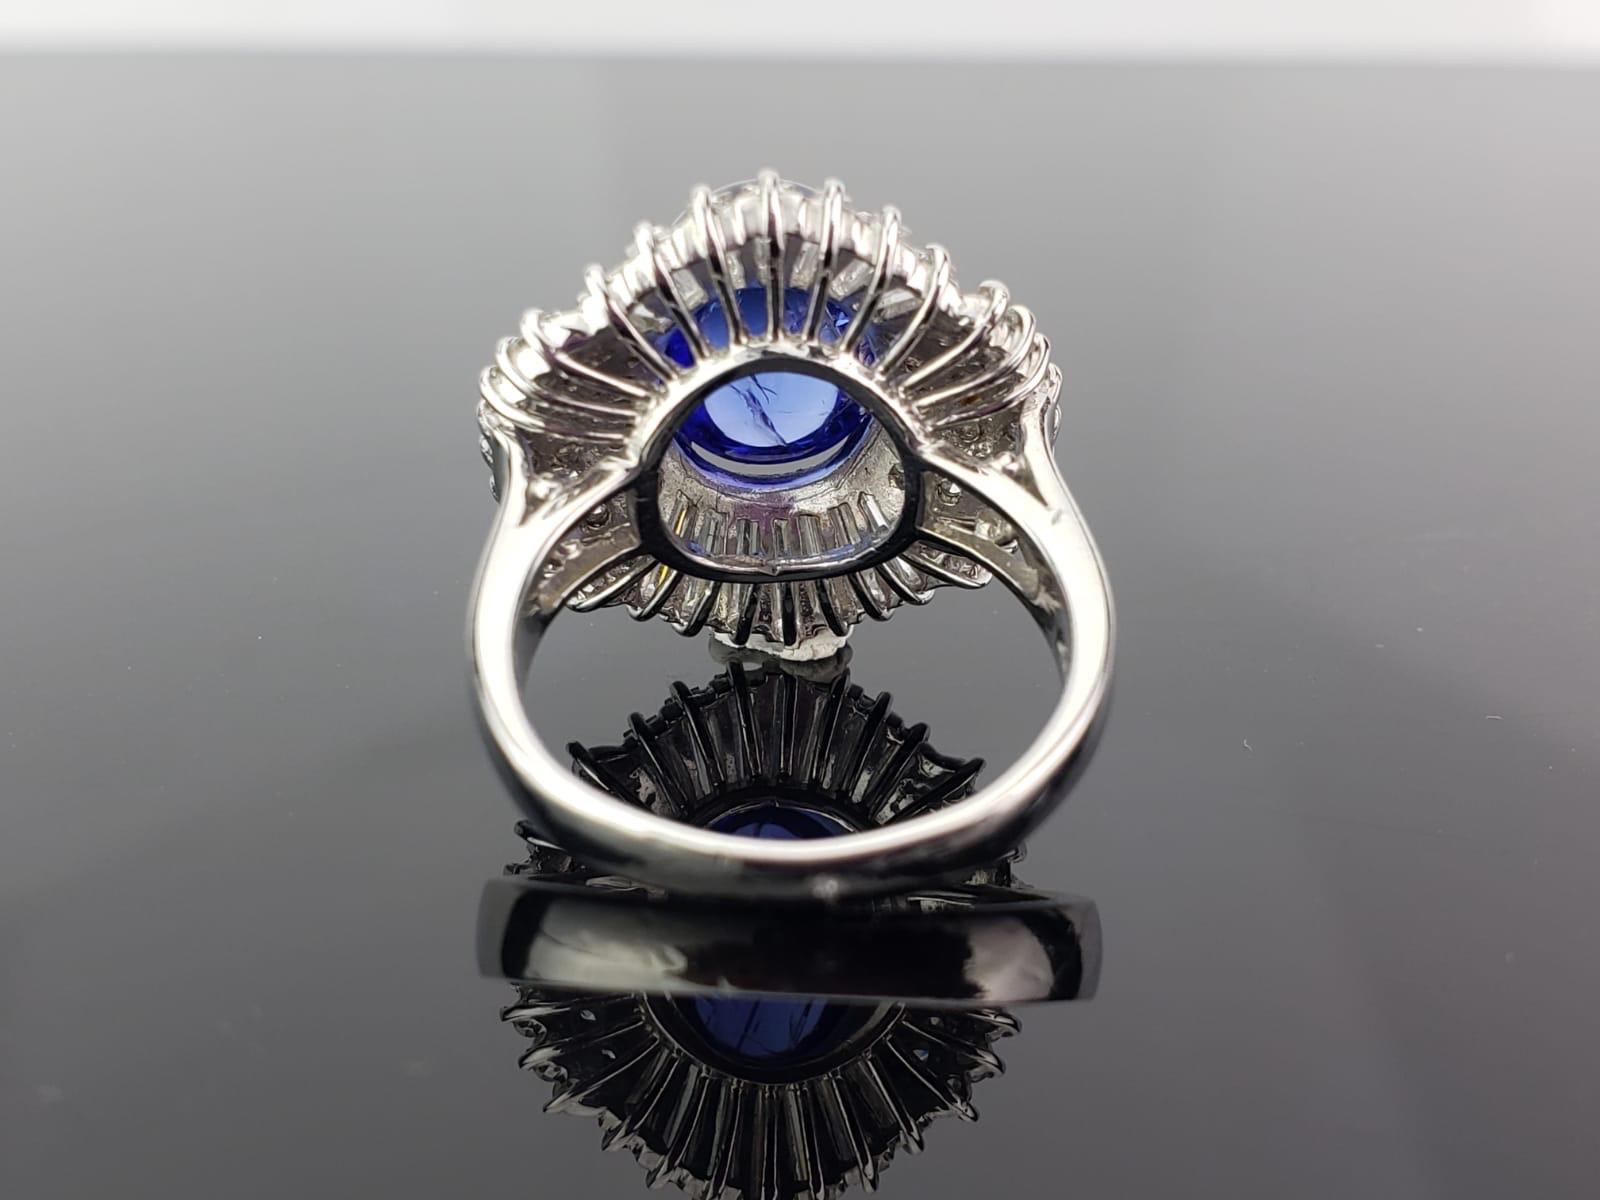 A 5.63 carat Tanzanite Cabochon set in a classic, art-deco looking setting with  1.69 carat Diamond Baguettes and Rounds. The ring is made using 10.45 grams of Platinum. The centre stone is a natural tanzanite, which is absolutely transparent with